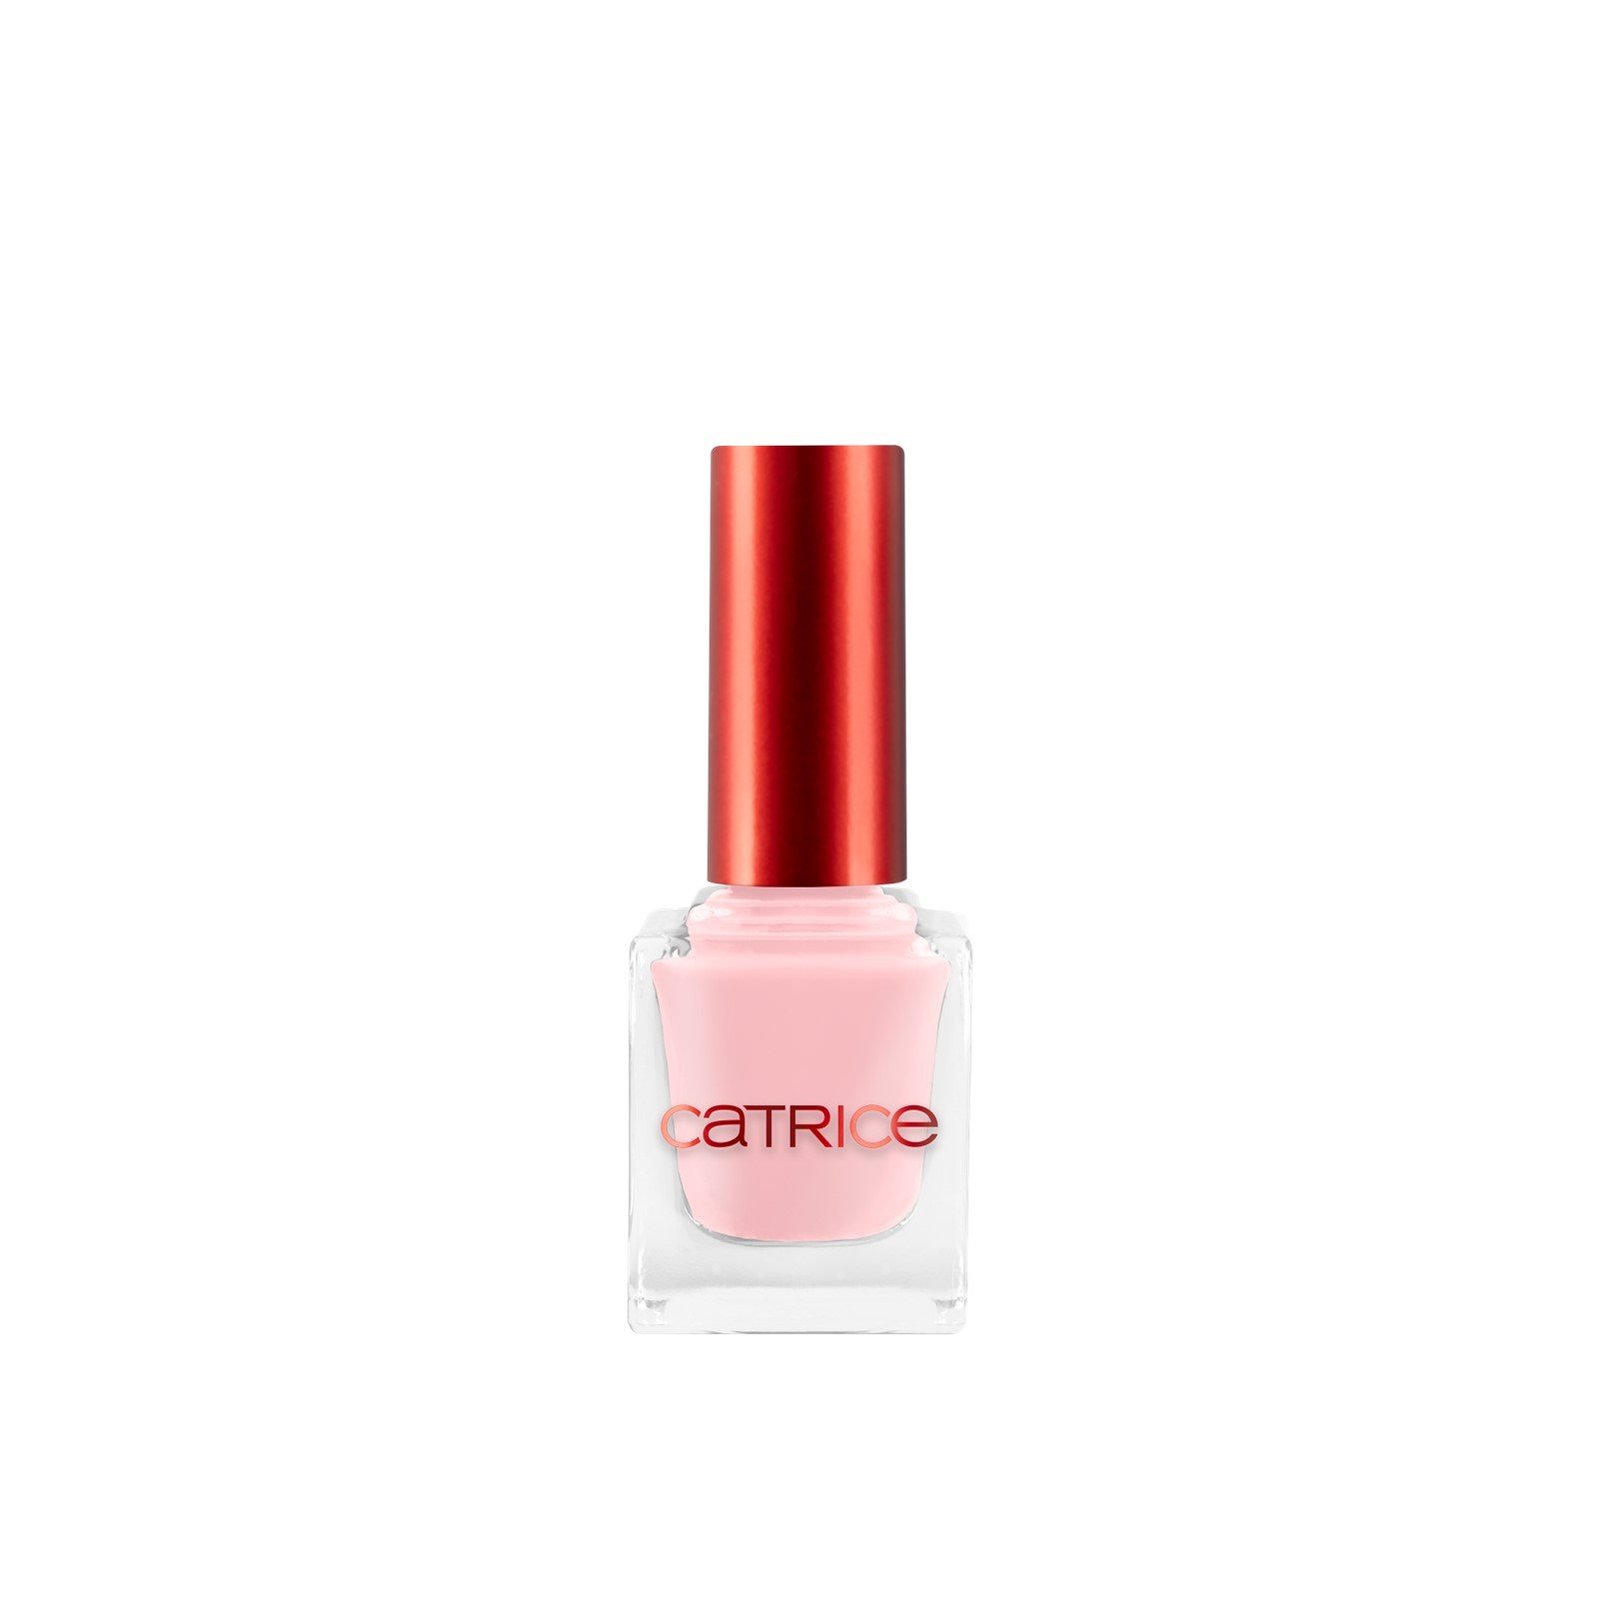 Catrice Heart Affair Nail Lacquer 02 Crazy In Love 10.5ml (0.35floz)